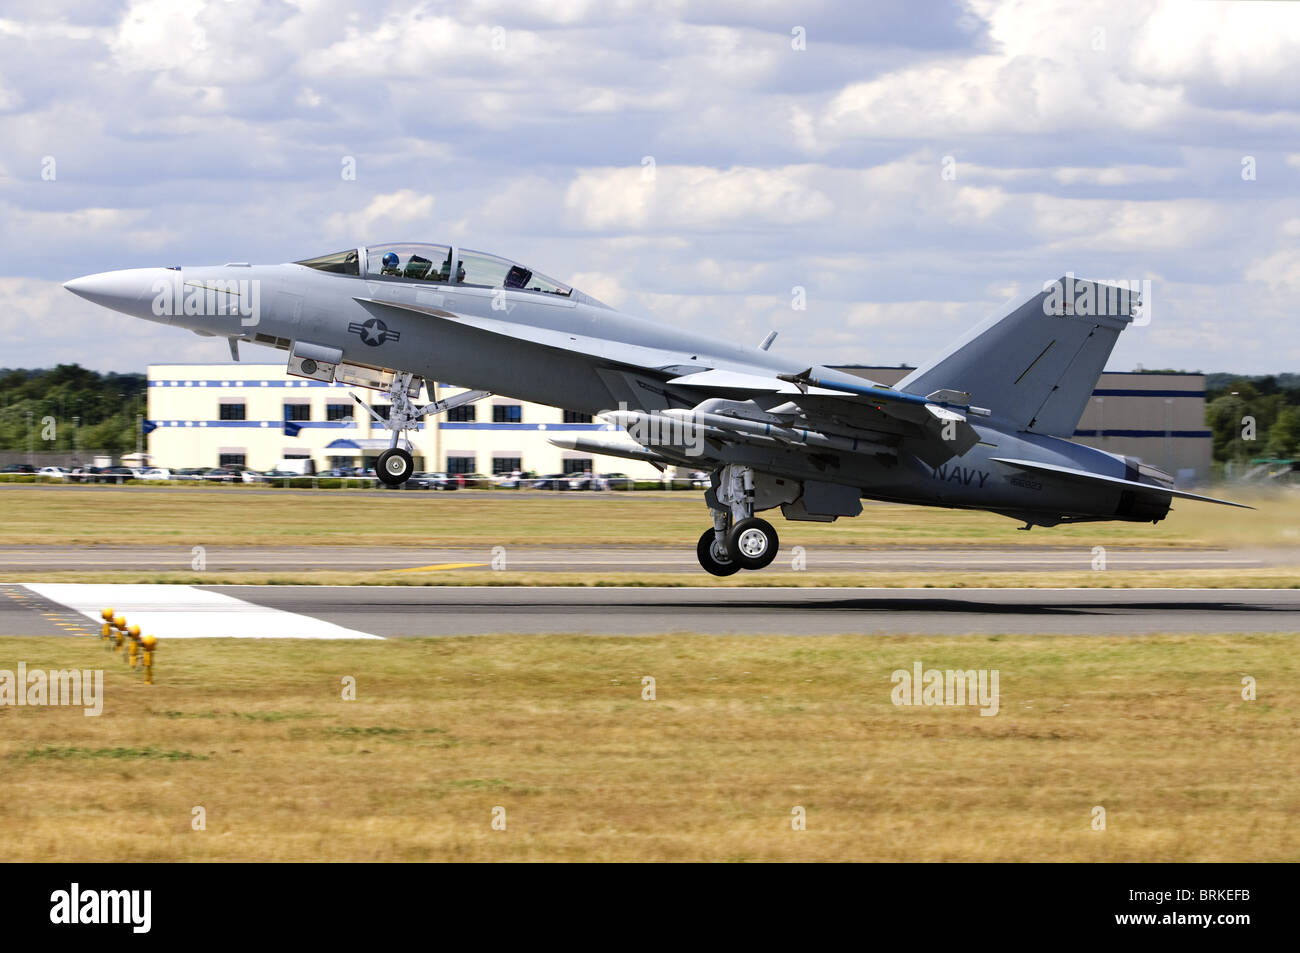 Boeing F/A-18F Super Hornet operated by the US Navy taking off at Farnborough Airshow, Farnborough, UK. Stock Photo